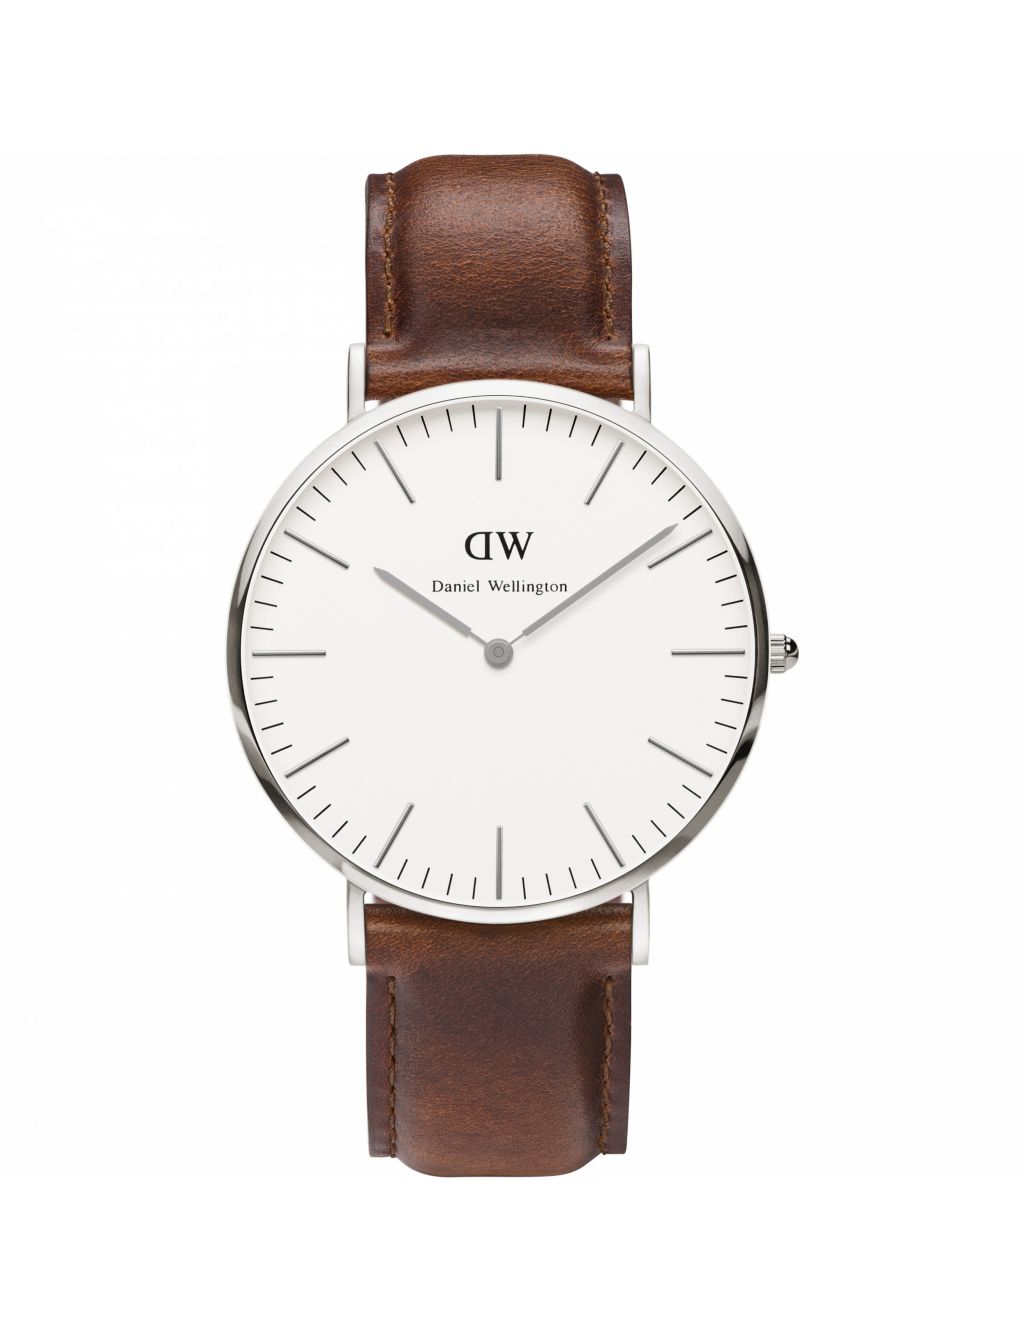 Daniel Wellington St Mawes Brown Leather Watch image 1